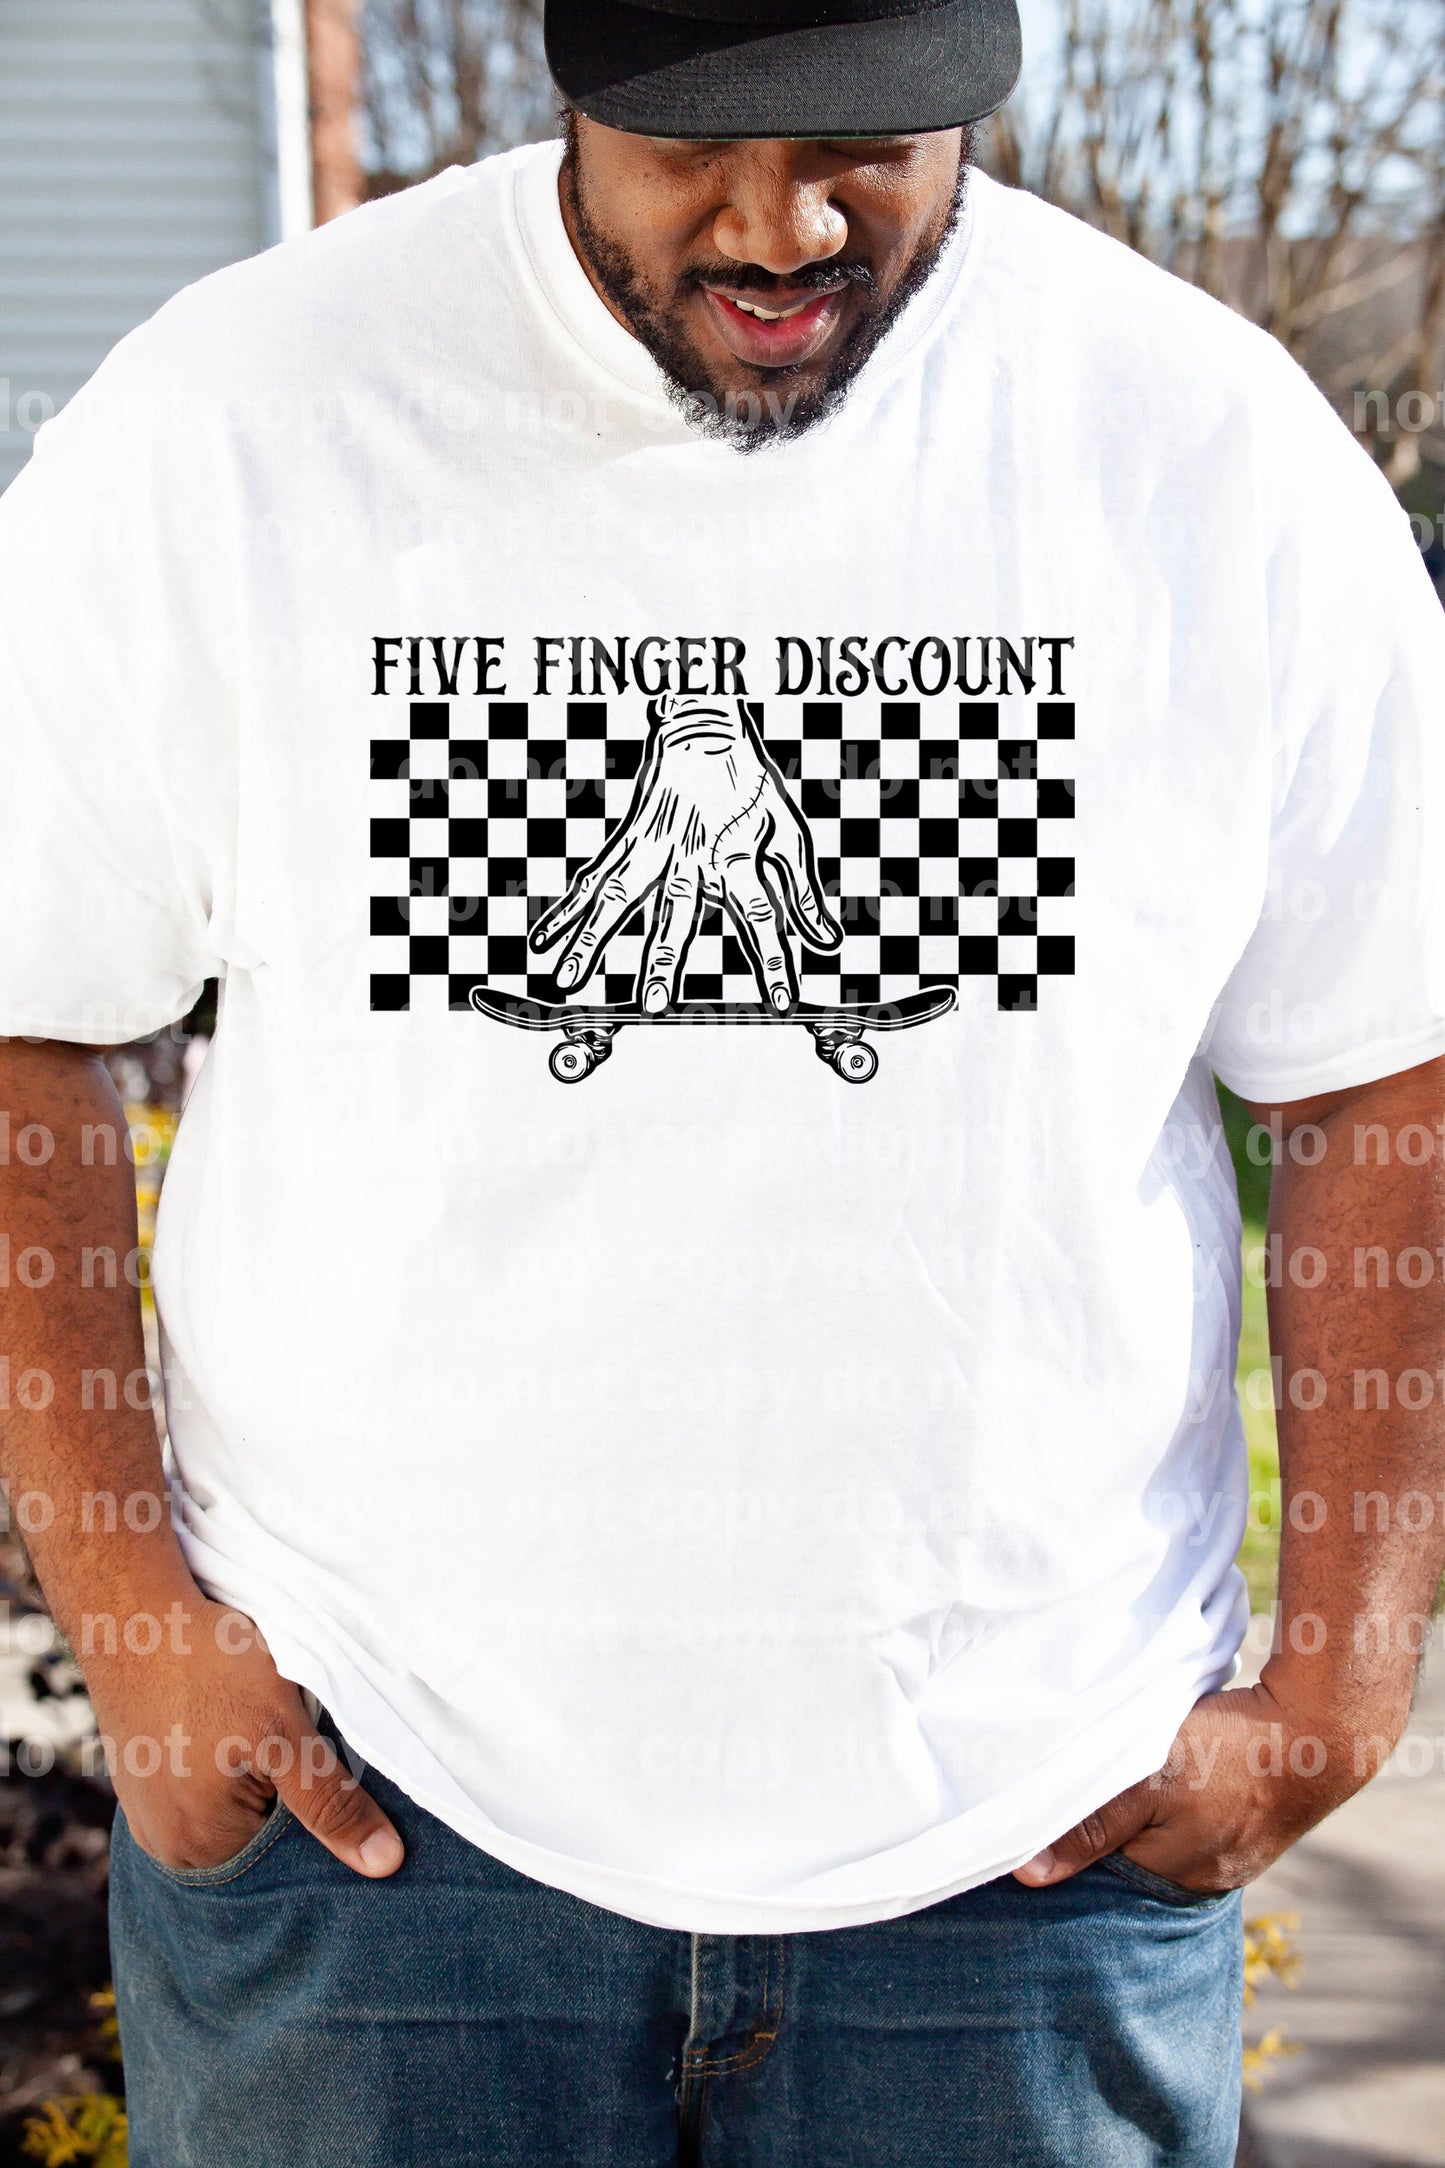 Five Finger Discount Checkered Full Color/One Color Dream Print or Sublimation Print